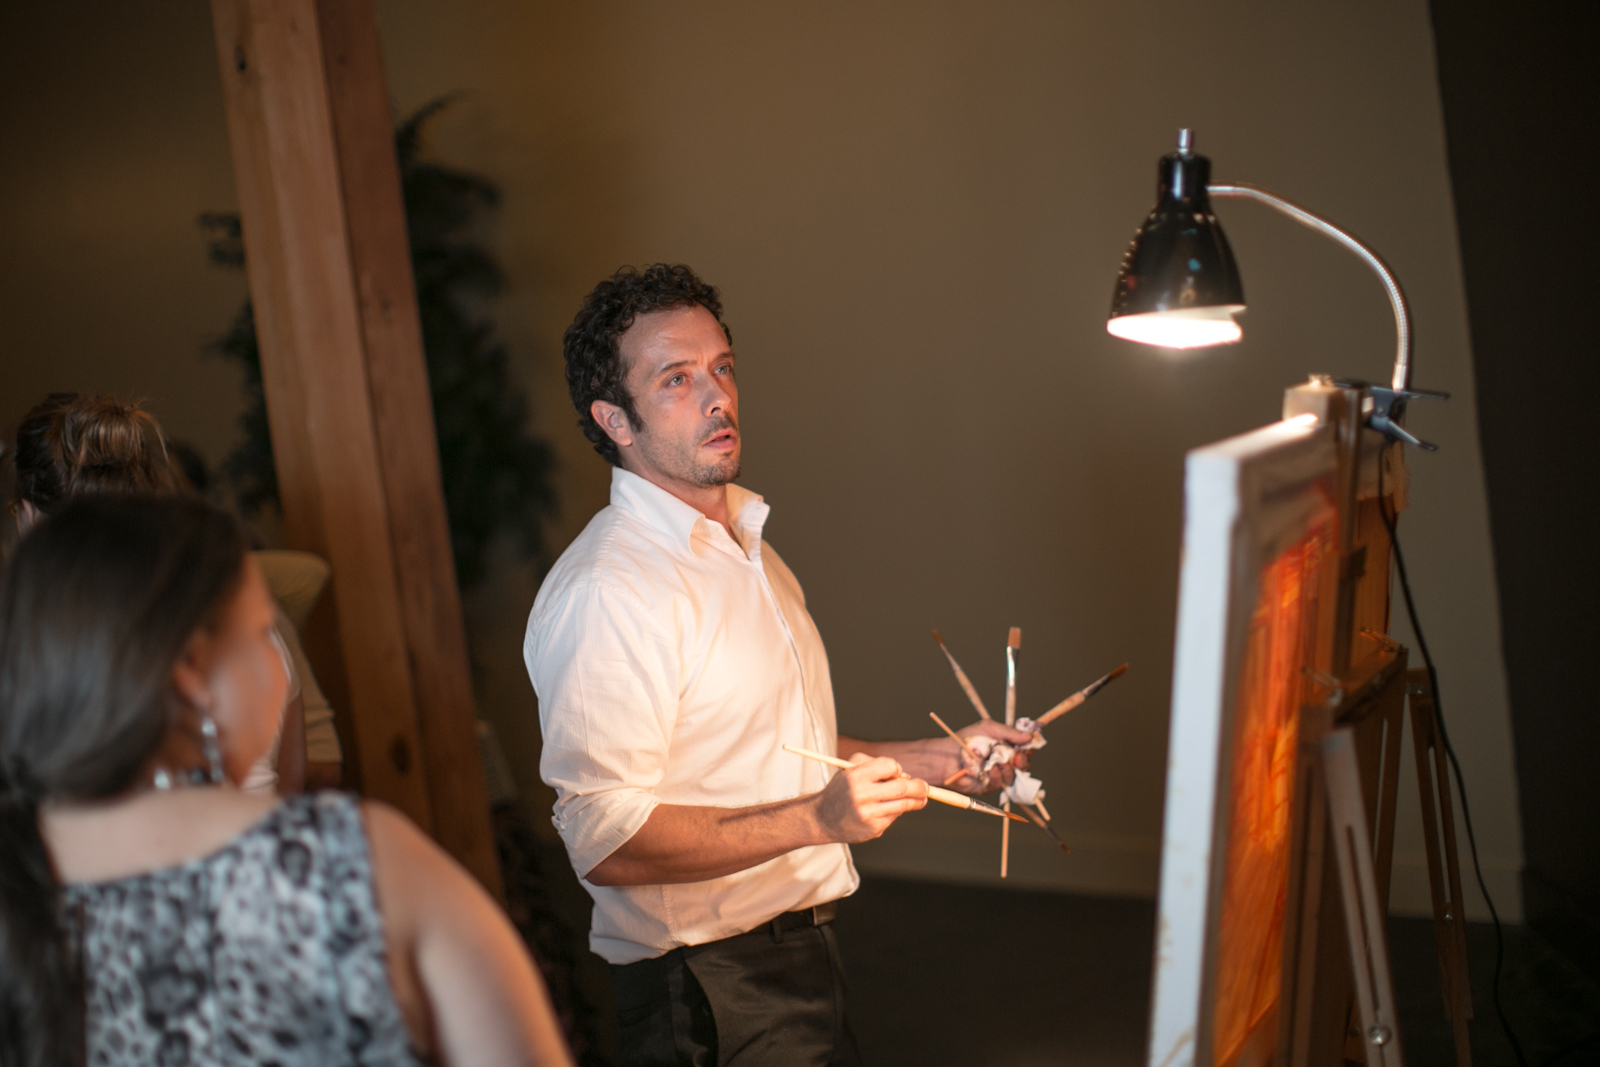 Artist Ben Keys is surrounded by guests as he paints live at a faux wedding reception hosted at The Mill Event Hall in Chattanooga, Tennessee // Photo Courtesy of Imago Photography